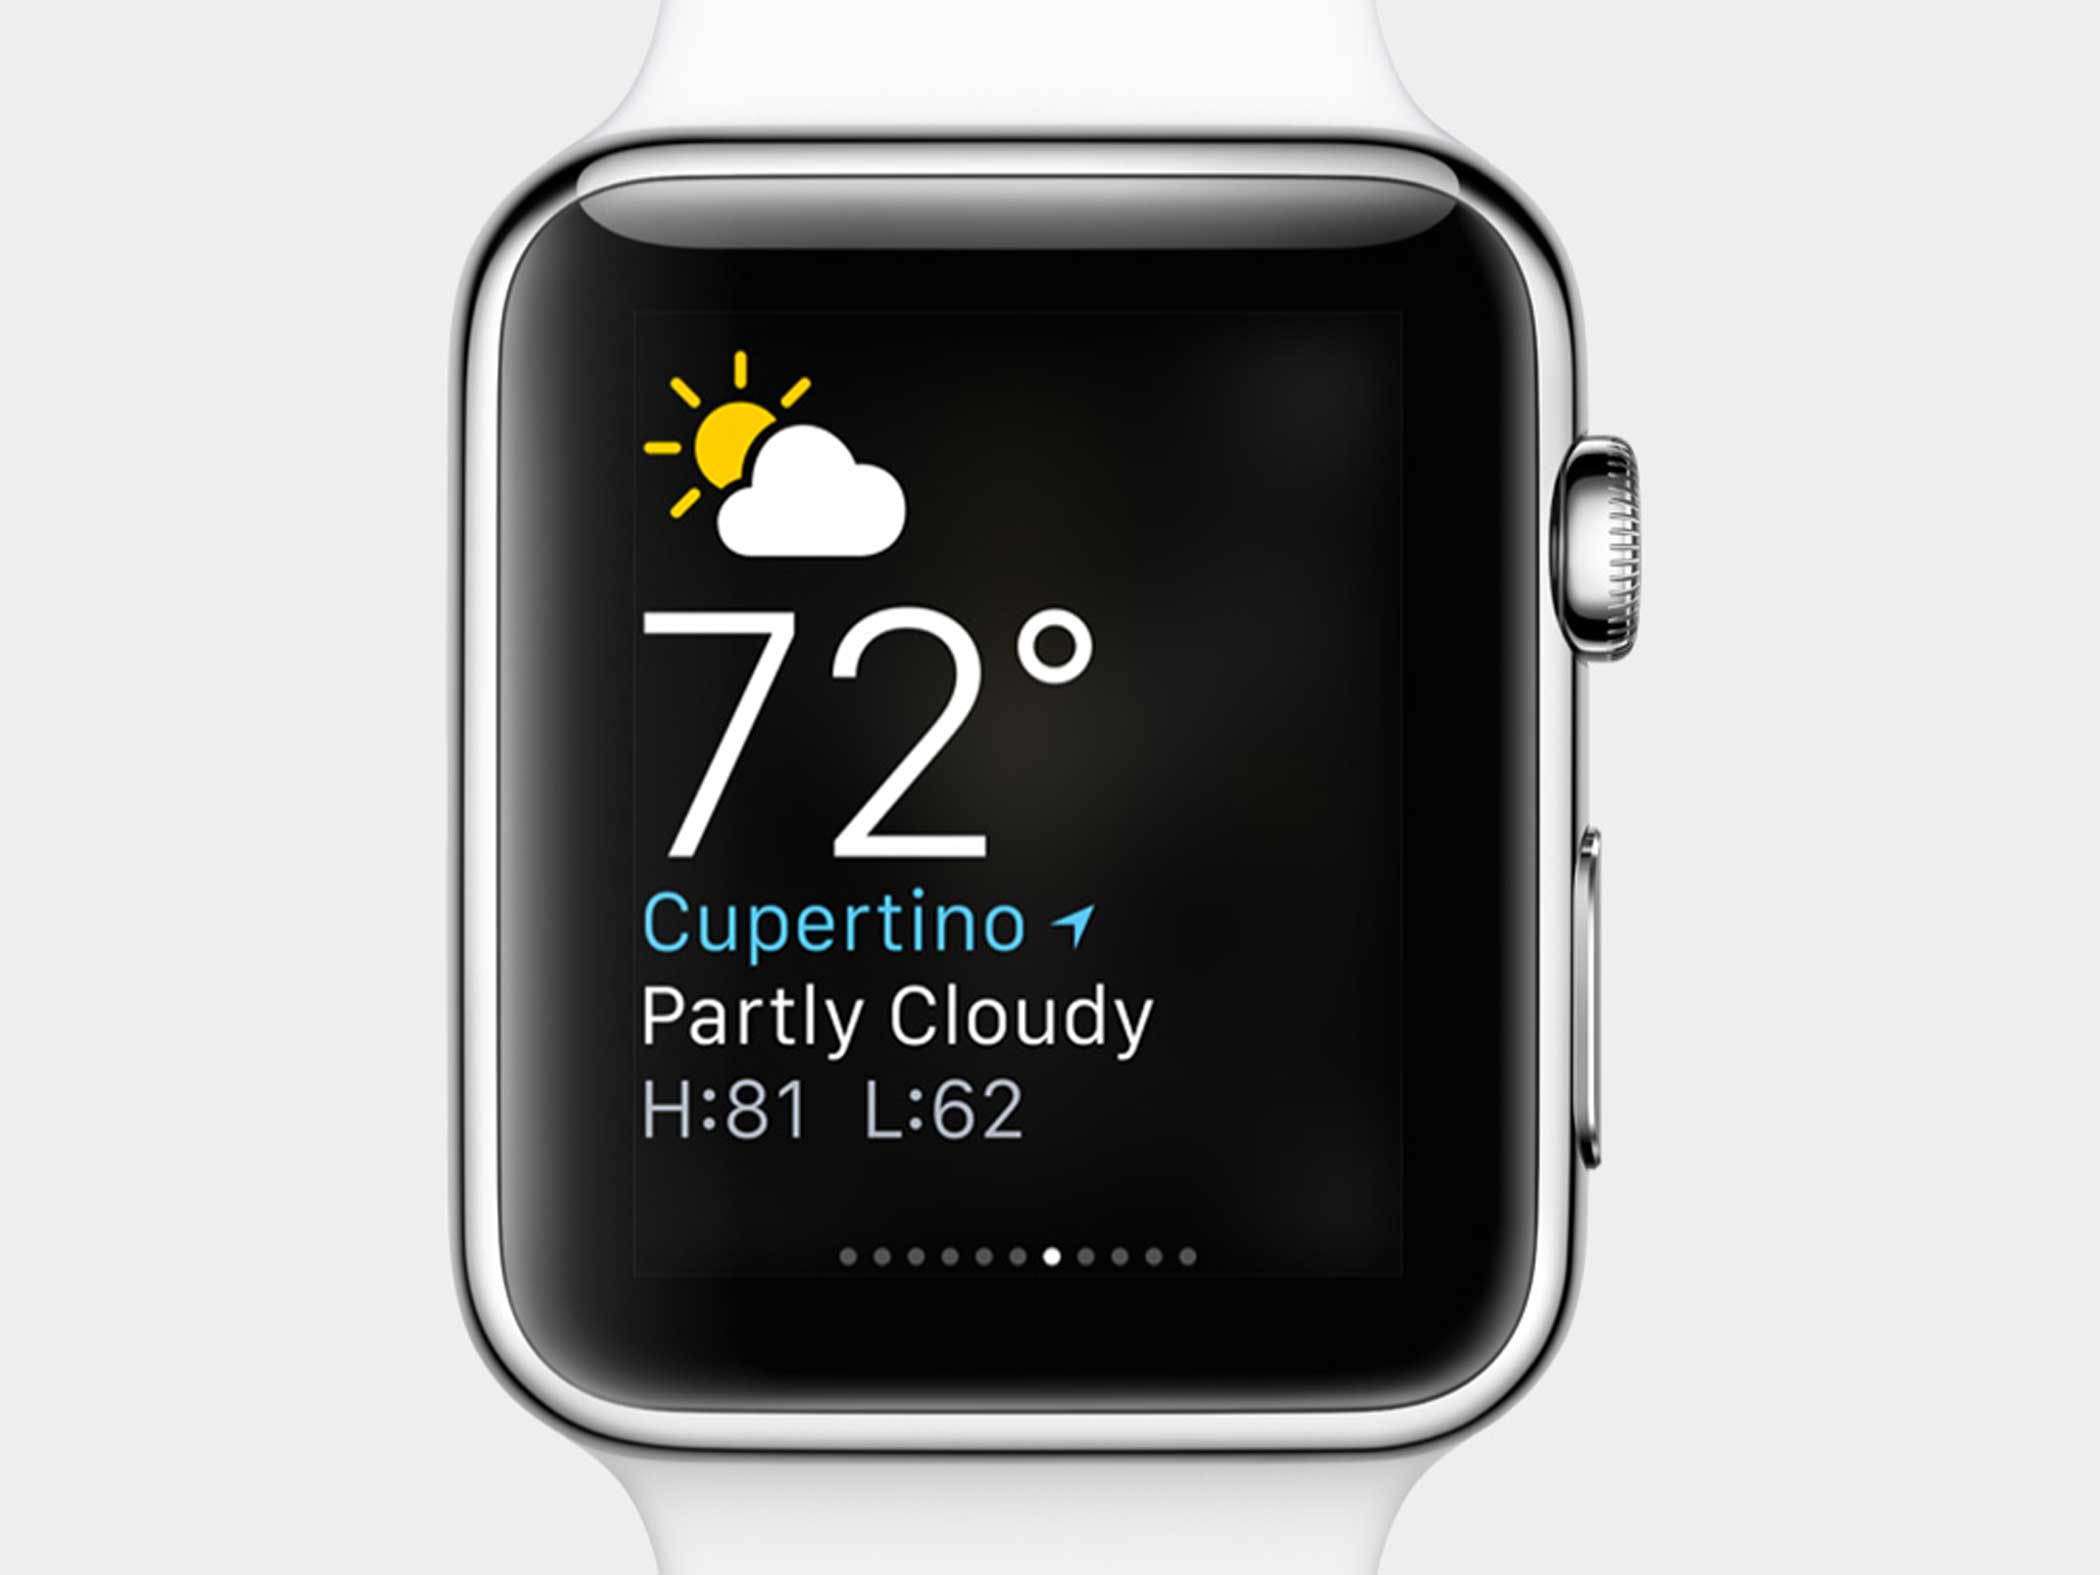 Swipe up from the watch face for Glances, quick summaries of the information you use most.